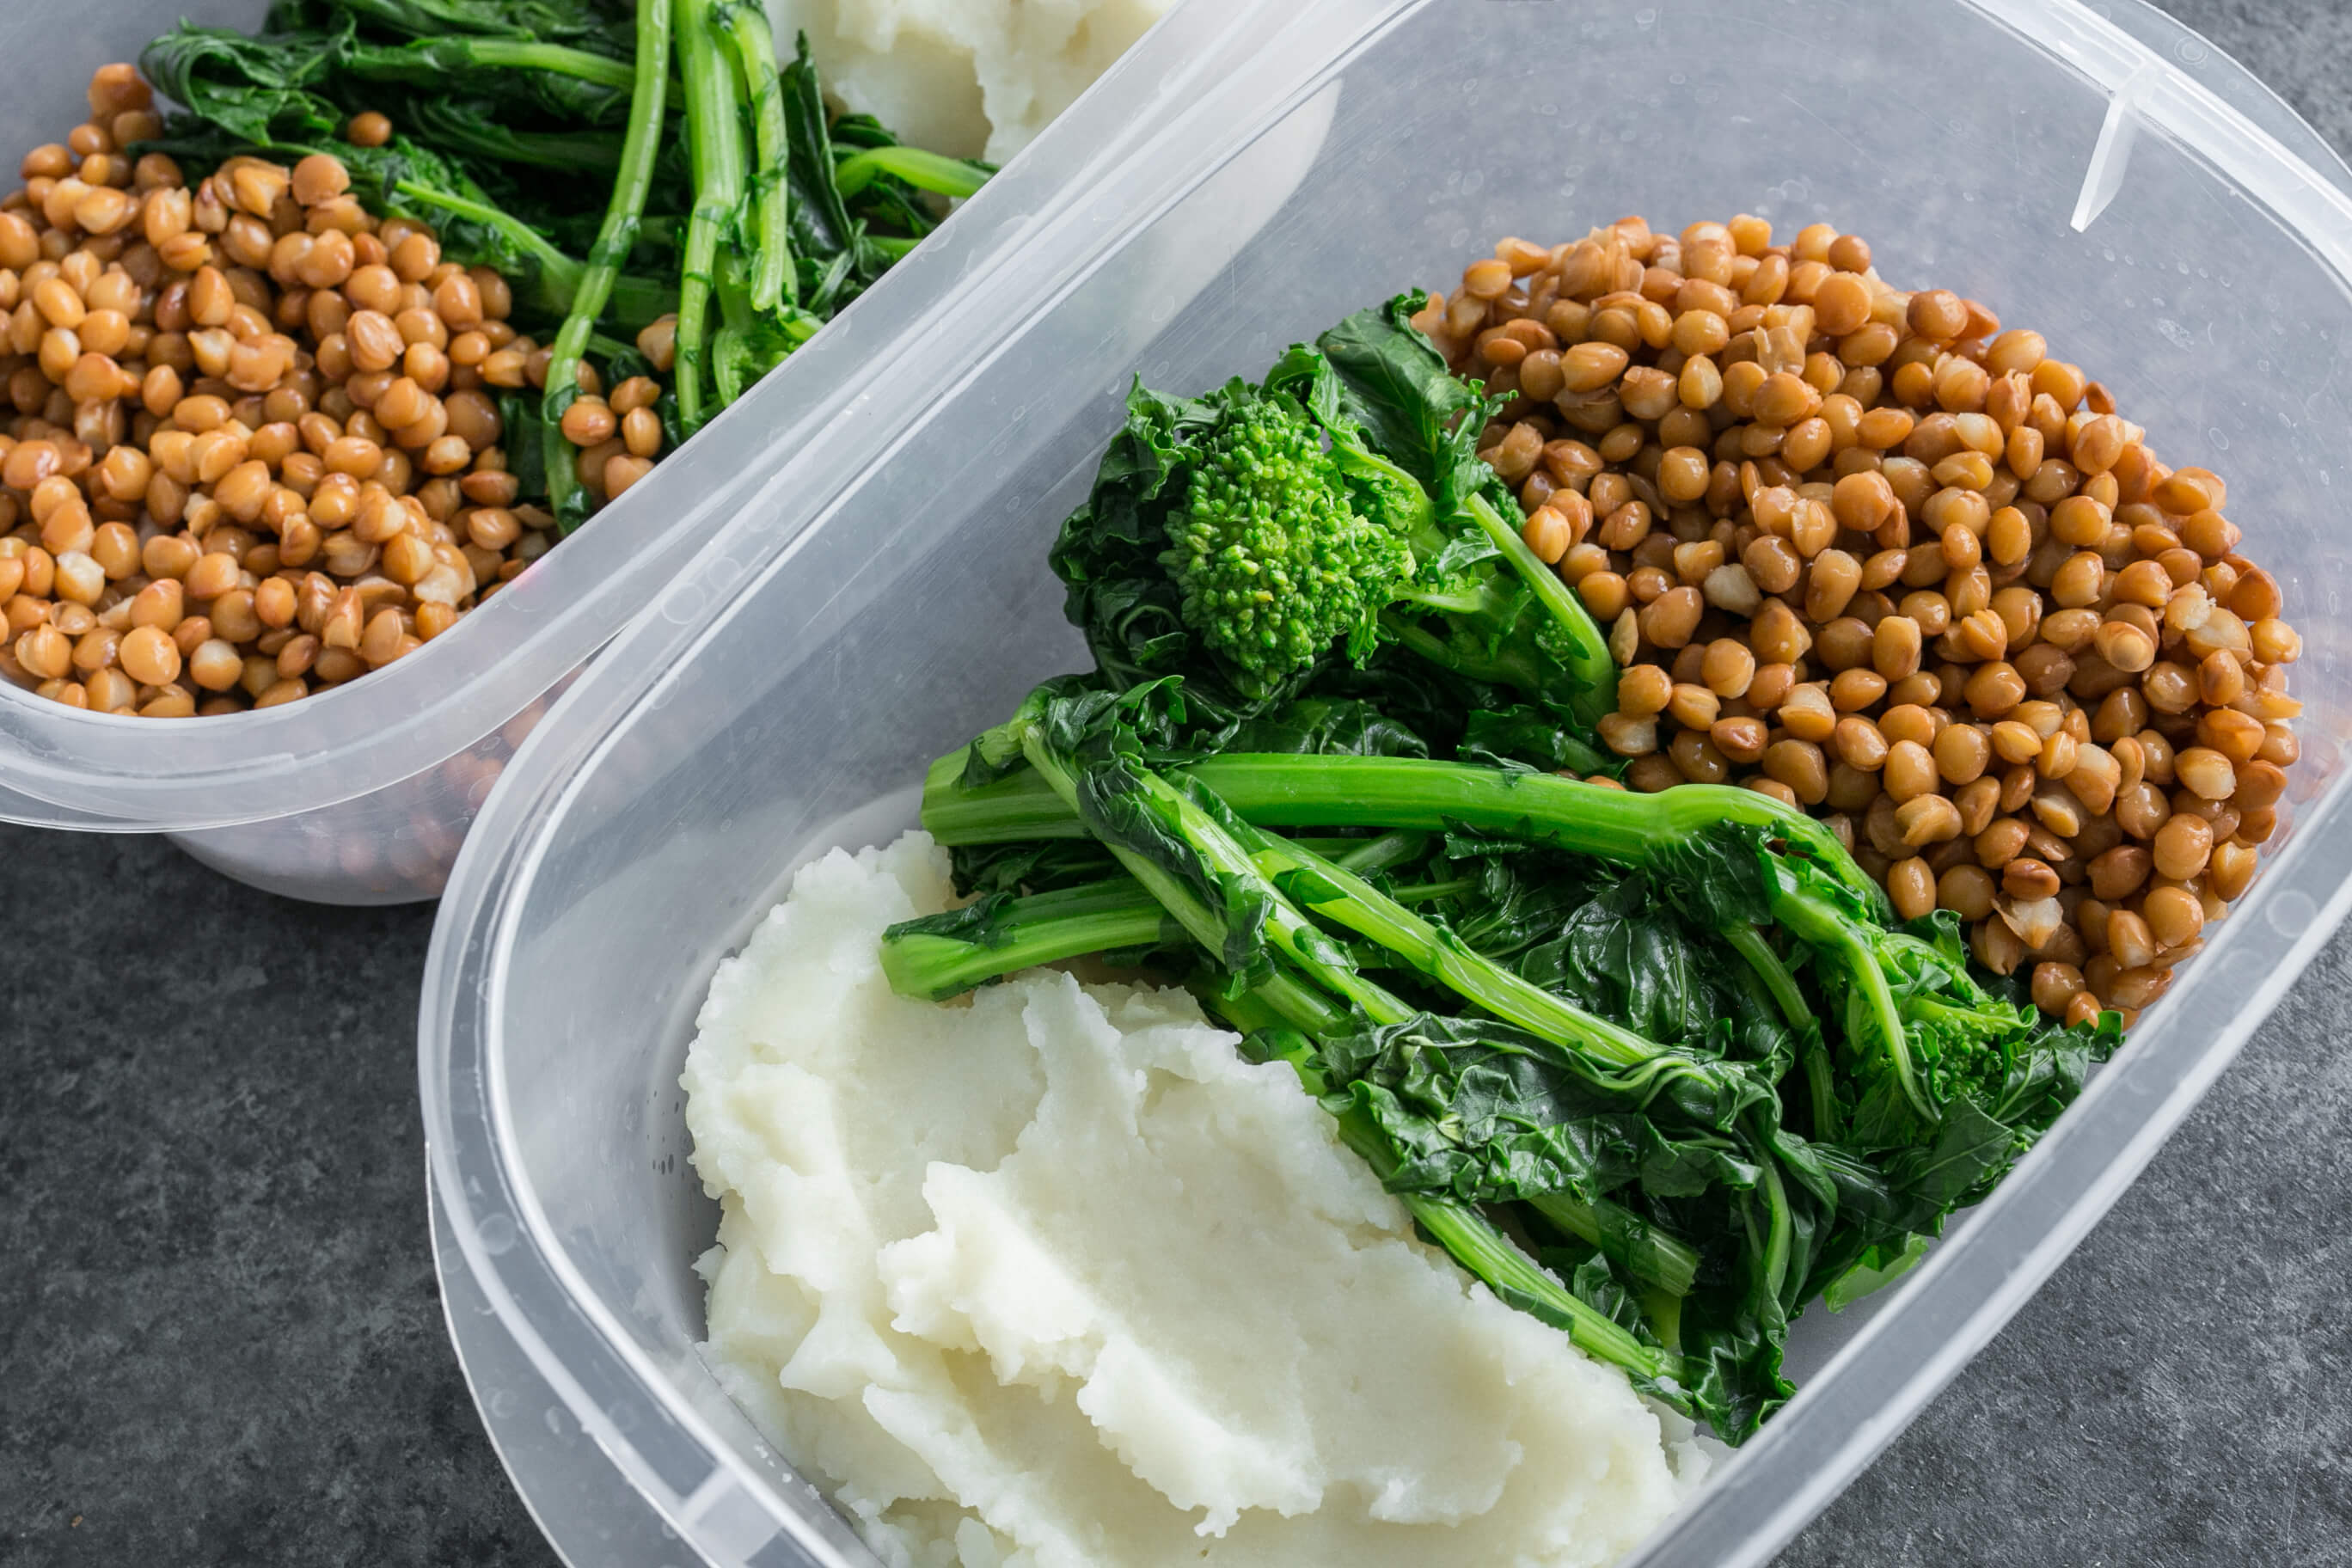 5 Ingredient Meal Ideas Your Clients Will Love: Lentils, Rapini, & Mashed Potatoes